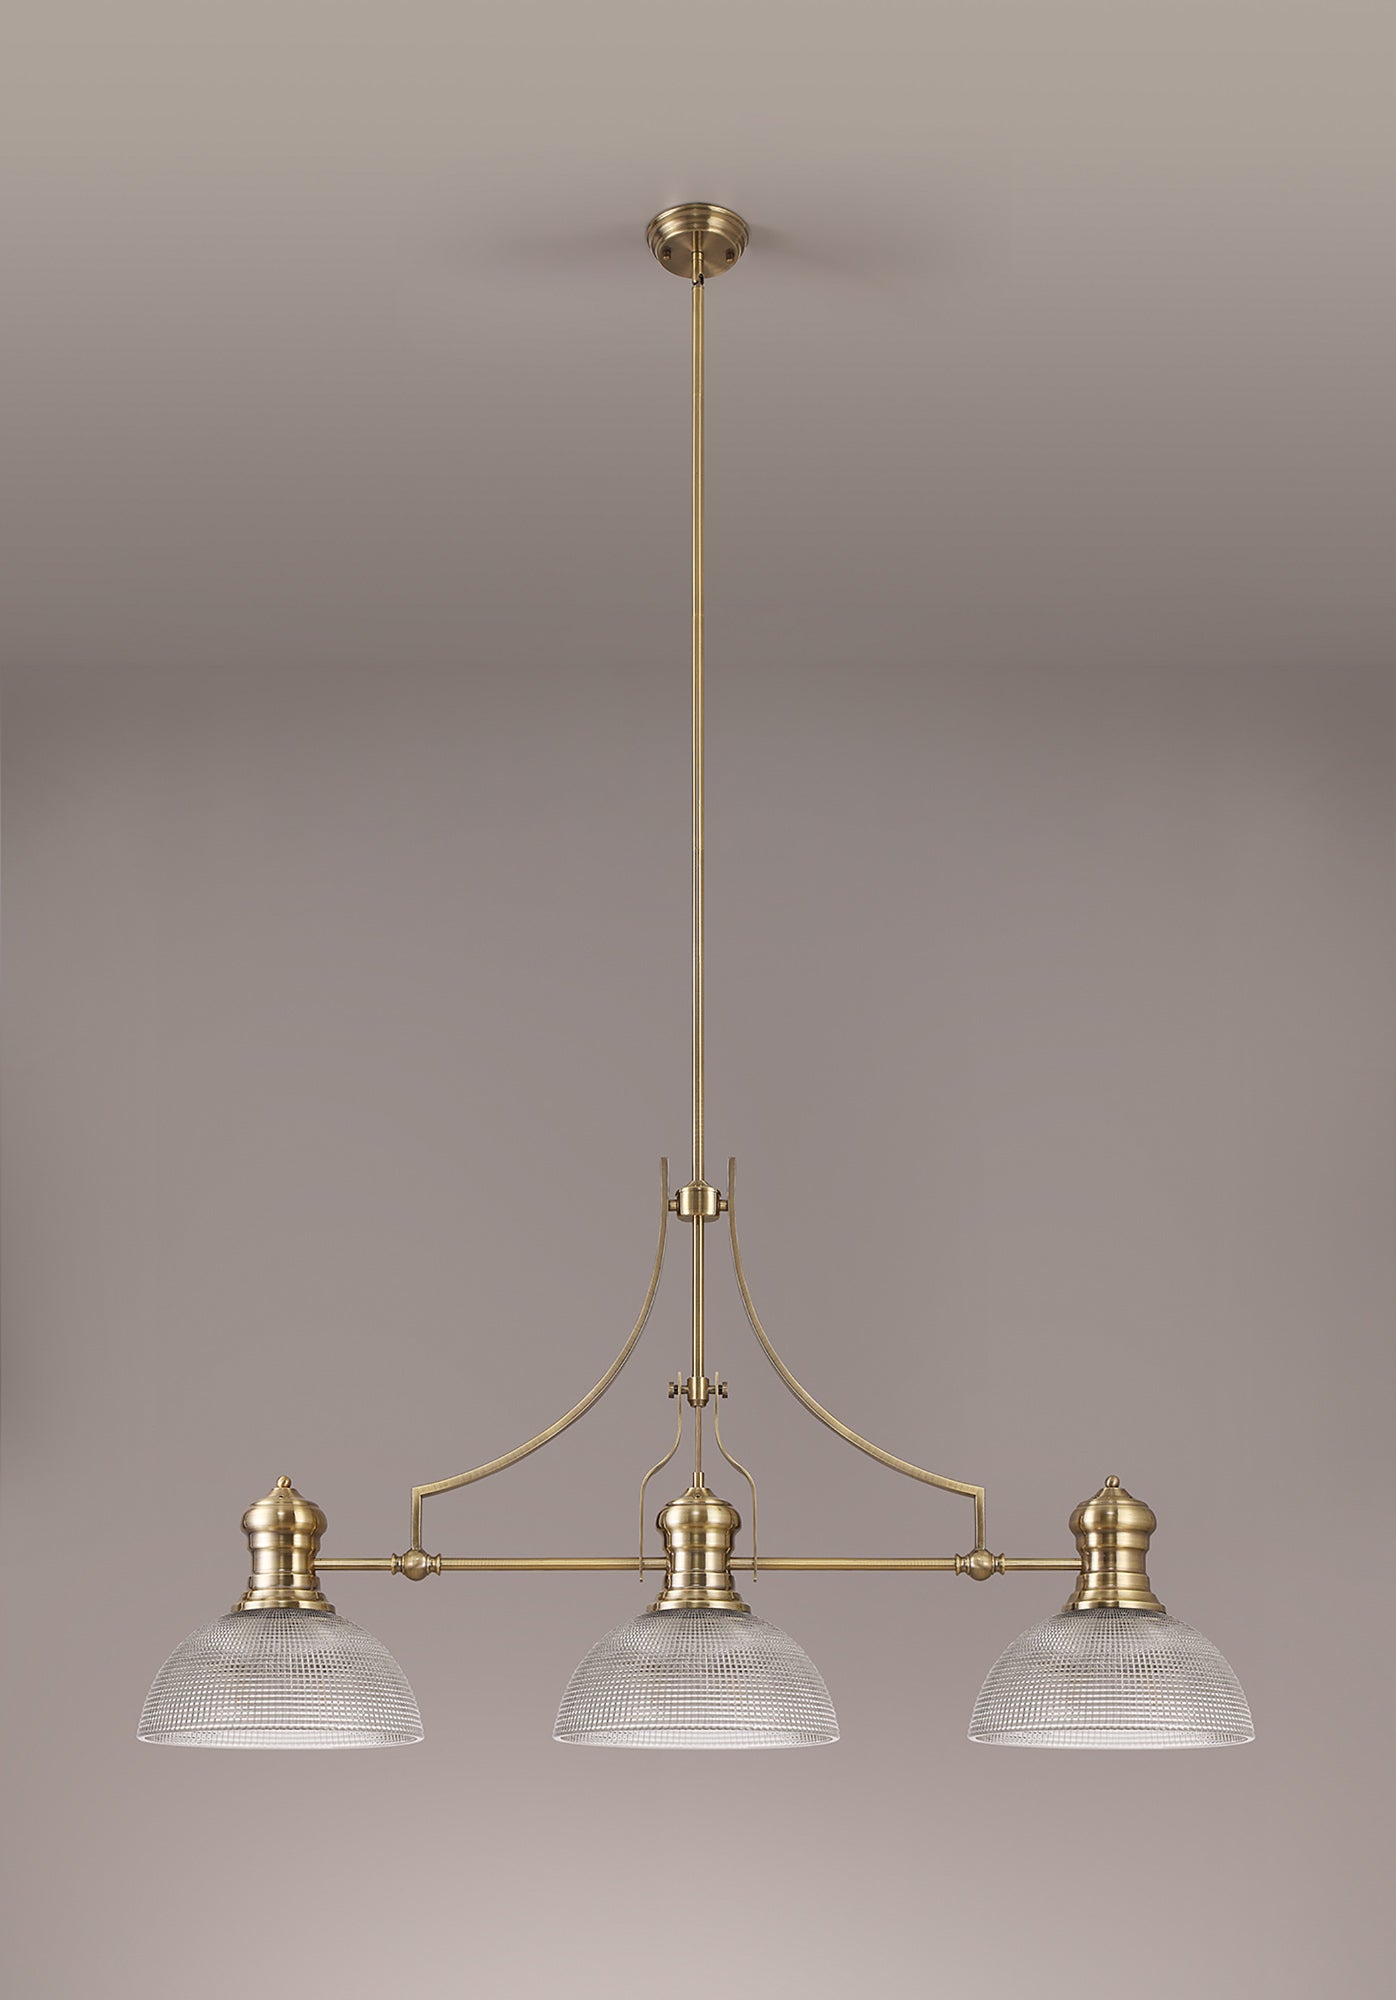 Docker 3 Light Linear Pendant E27 With 30cm Prismatic Glass Shade, Antique Brass, Clear